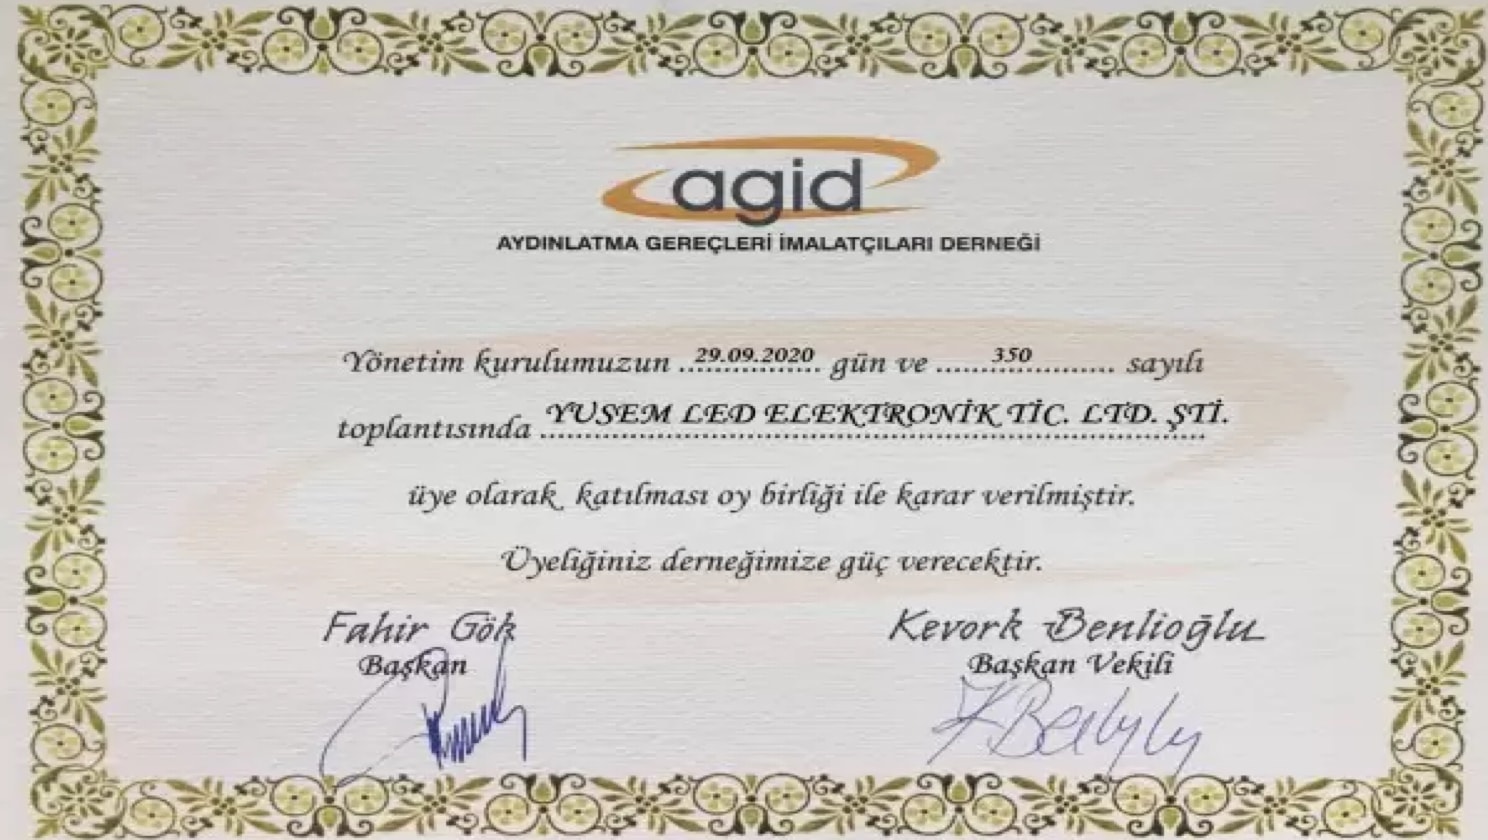 We Became a Member of AGID!